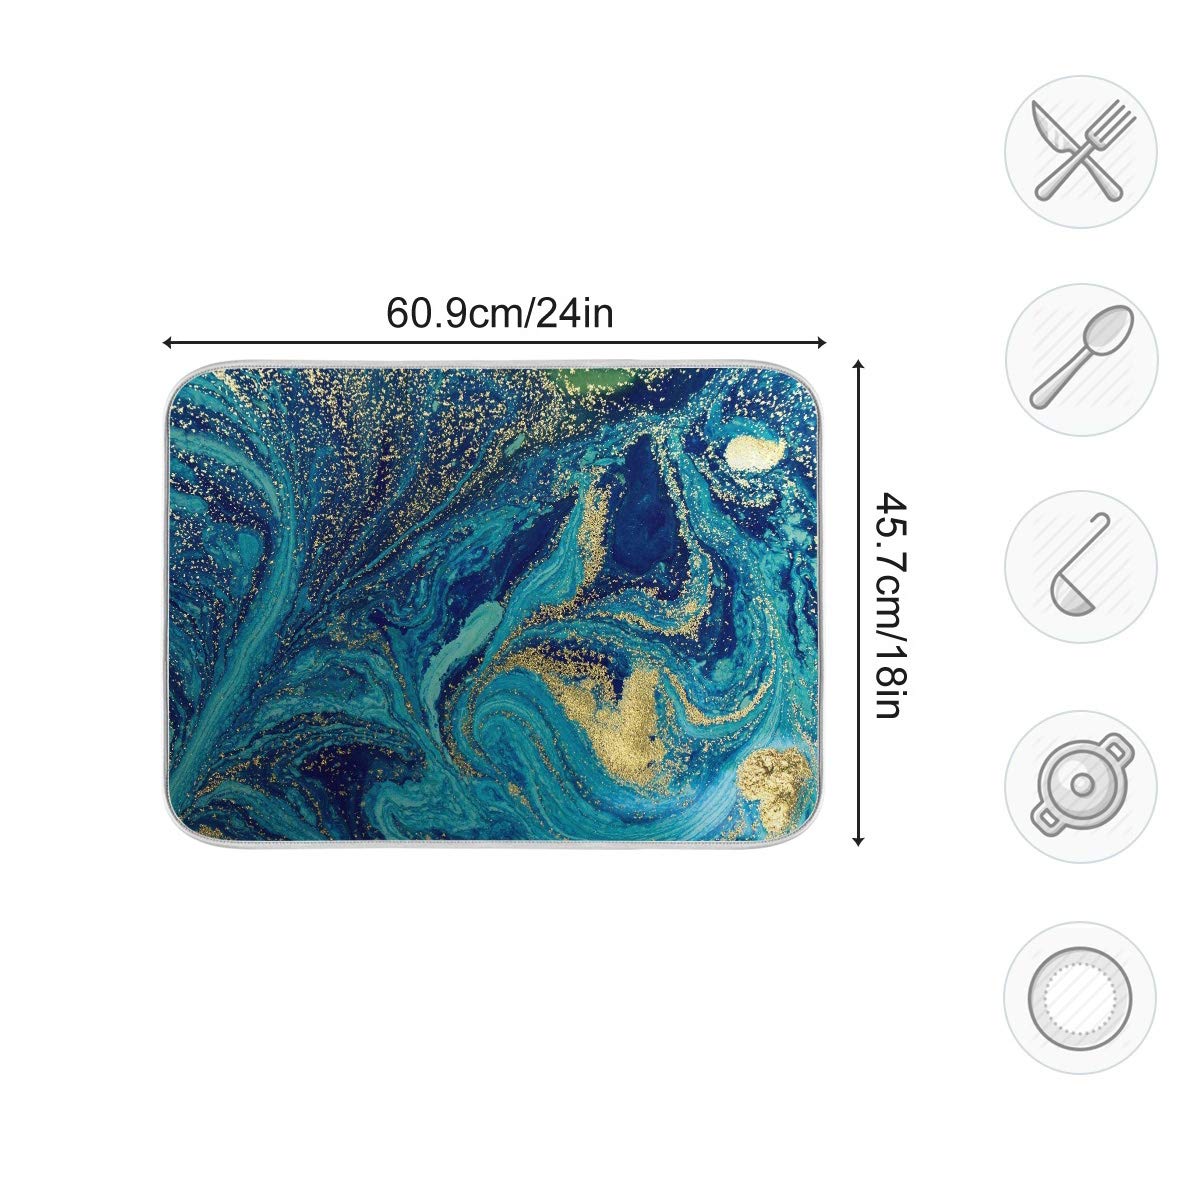 Marble Texture Blue Golden Dish Drying Mat 18x24 Inch Teal Turquoise Marbled Print Kitchen Counter Drying Mat Microfiber Dish Drying Rack Pad Reversible Dish Drainer Mats Washable Heat-Resistant